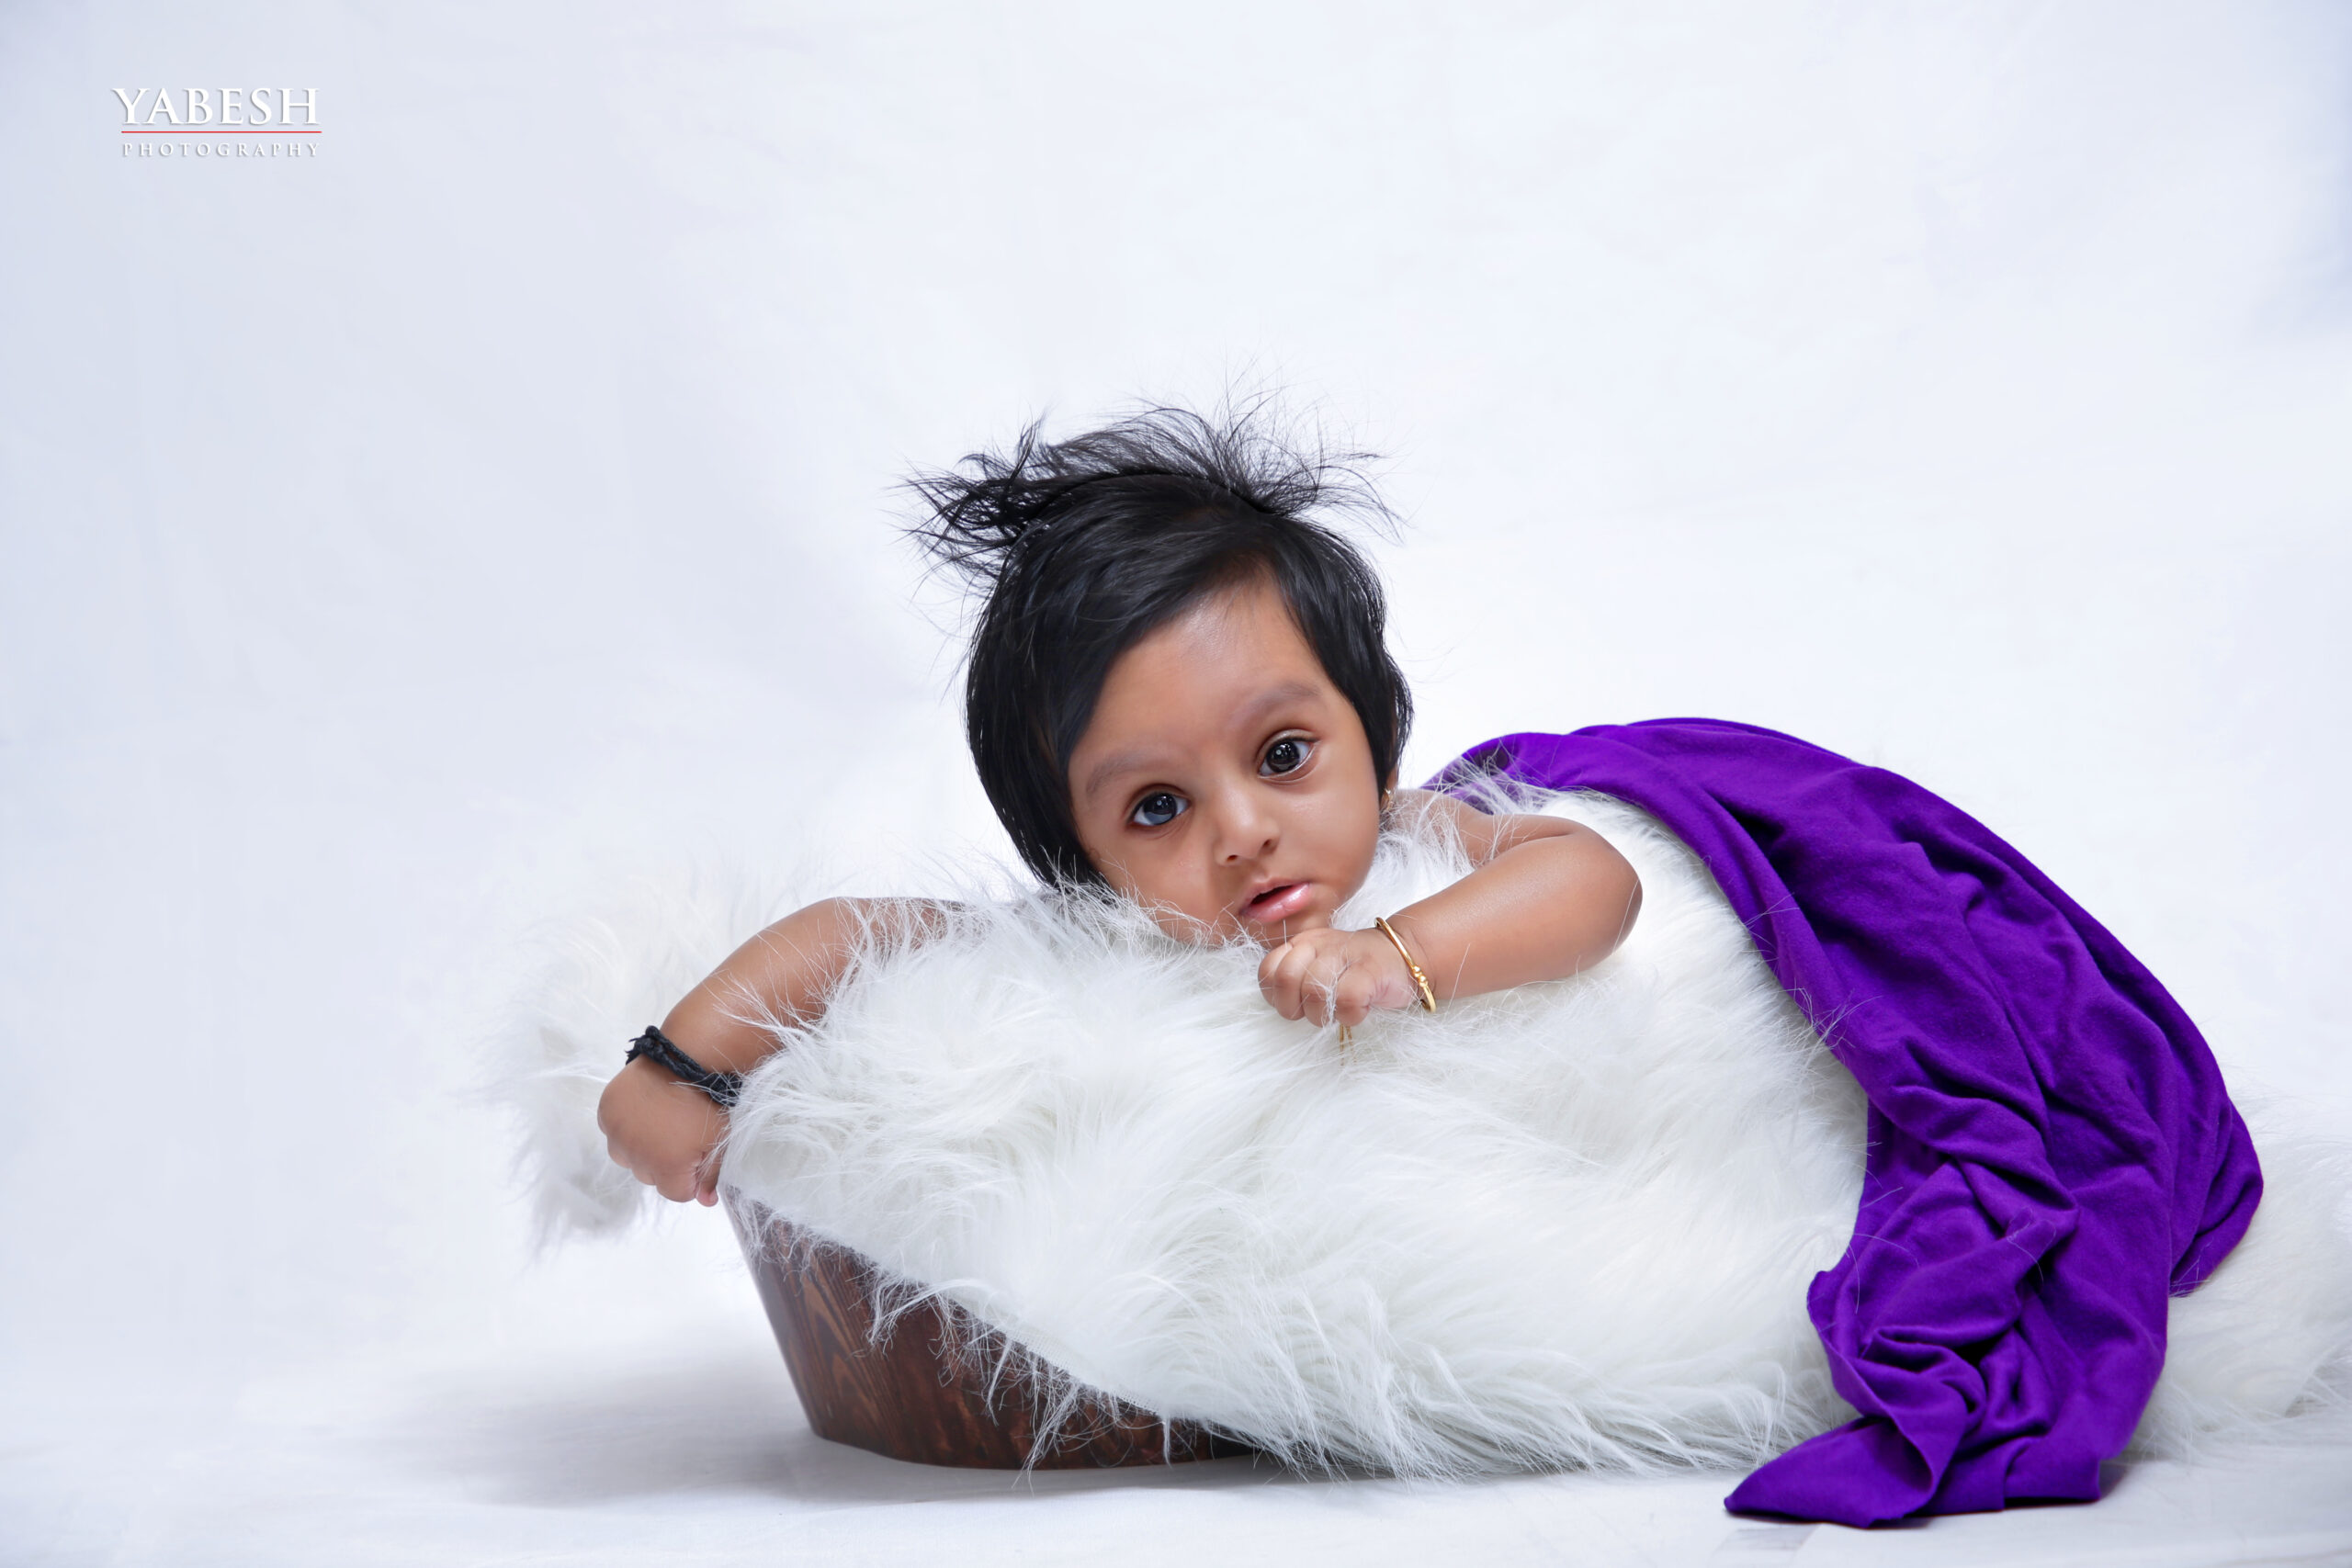 Birthday Photography Coimbatore: Capture Your Special Moments